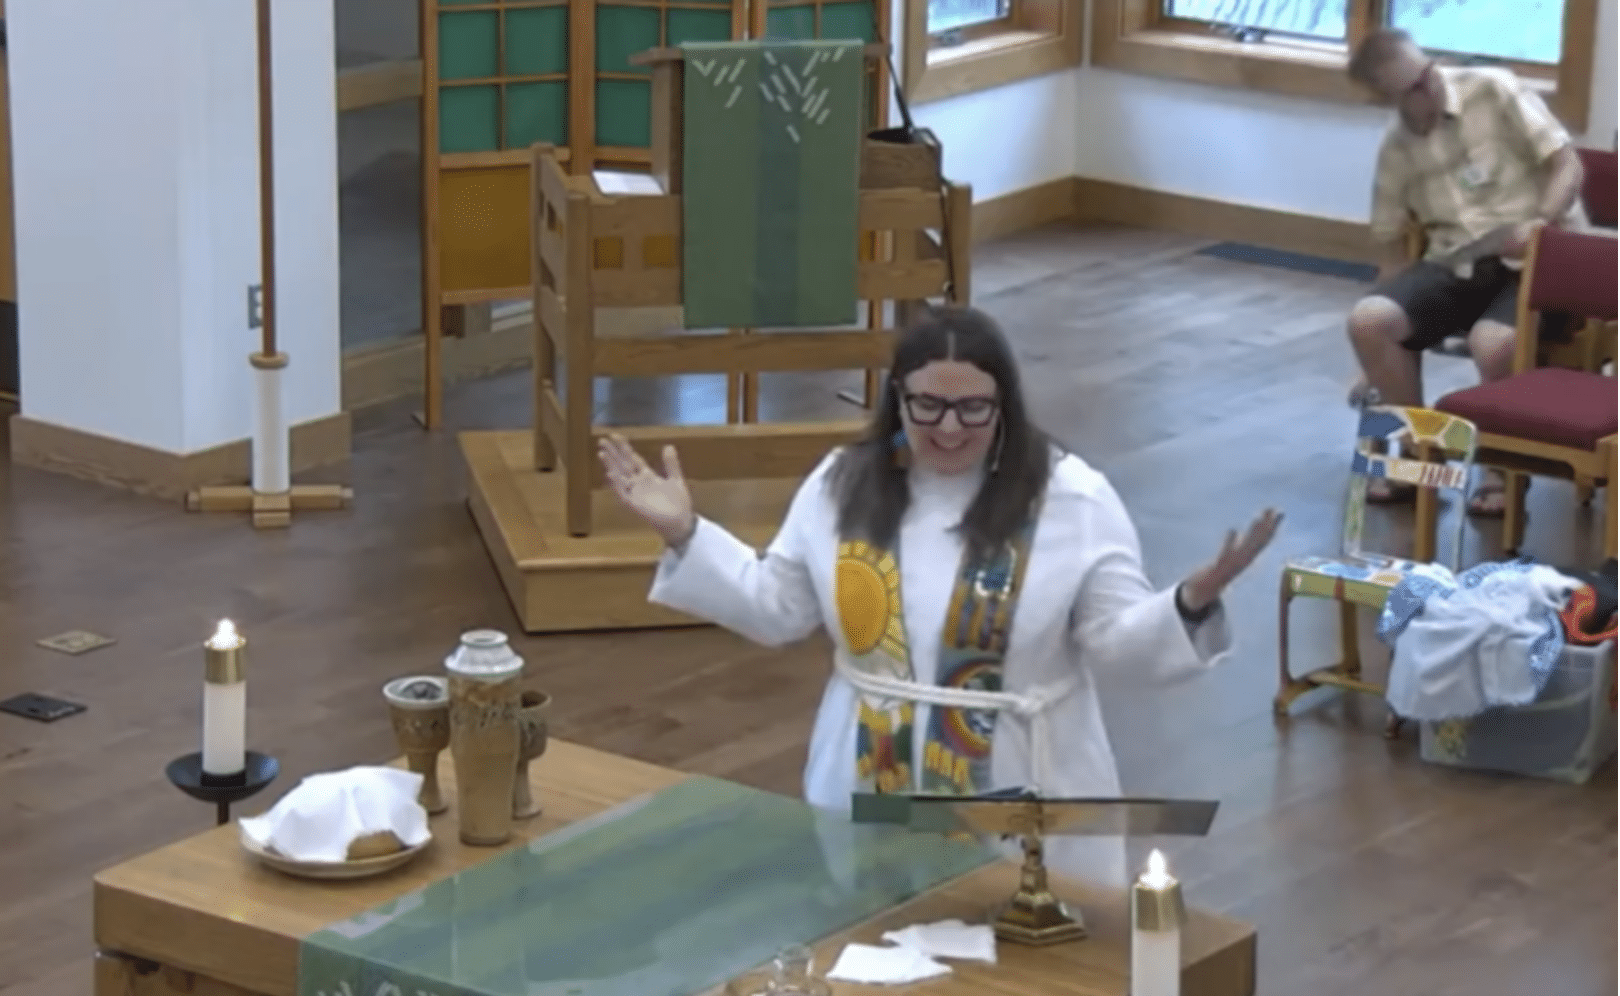 (WATCH) Lutheran female ‘minister’ leads congregation in pro-LGBT ‘Sparkle Creed’